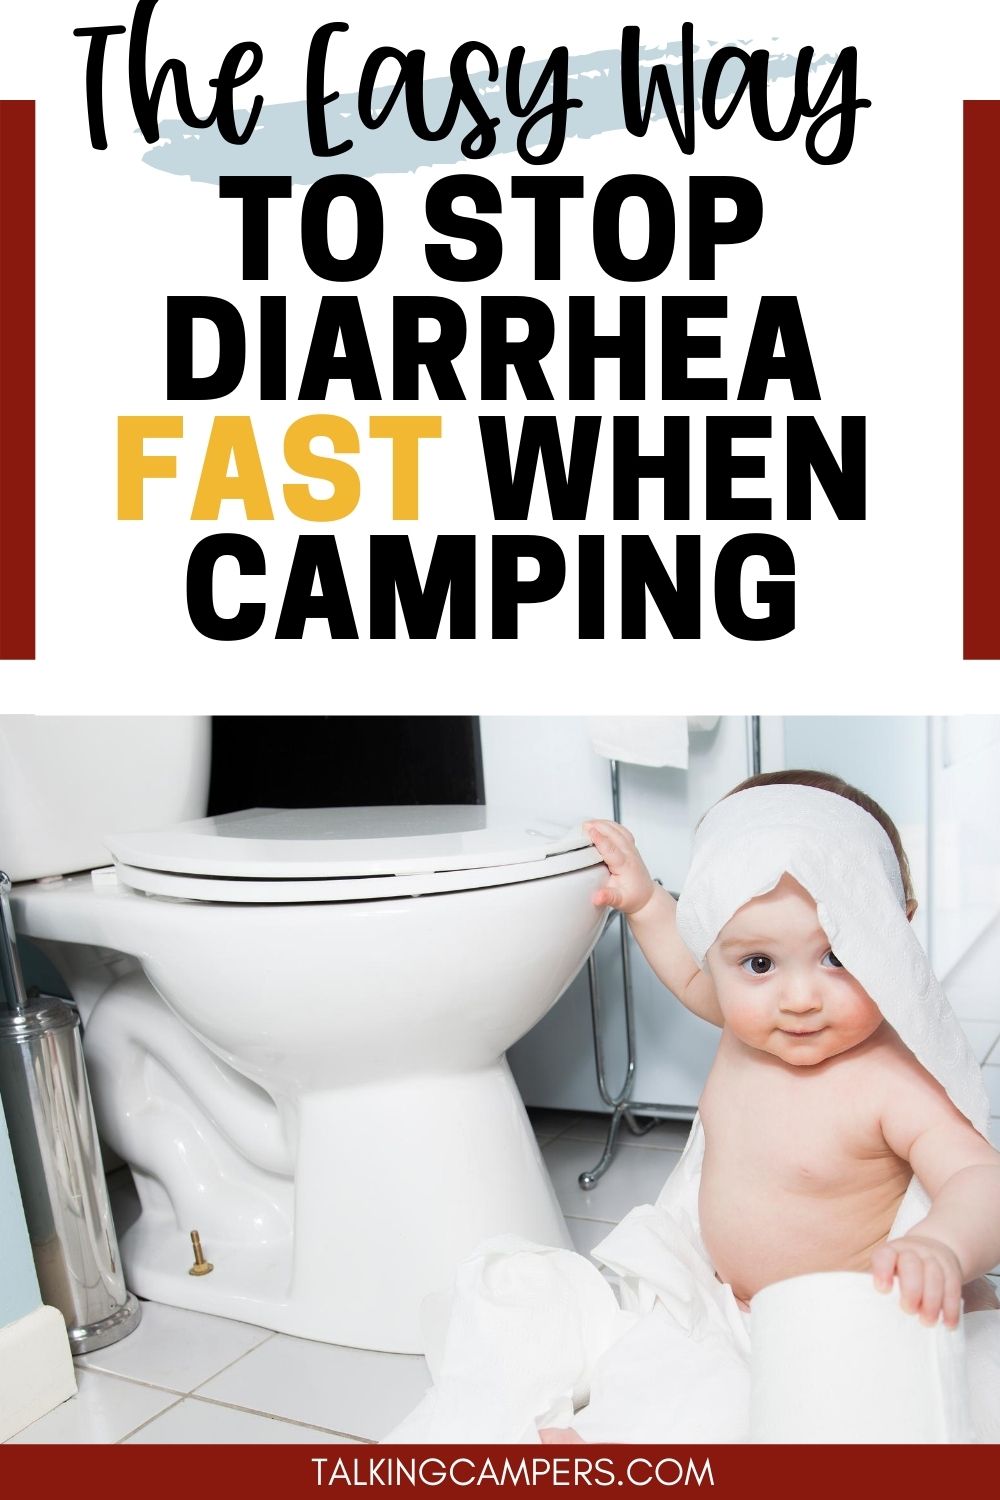 How to Stop Diarrhea FAST when Camping in 2020